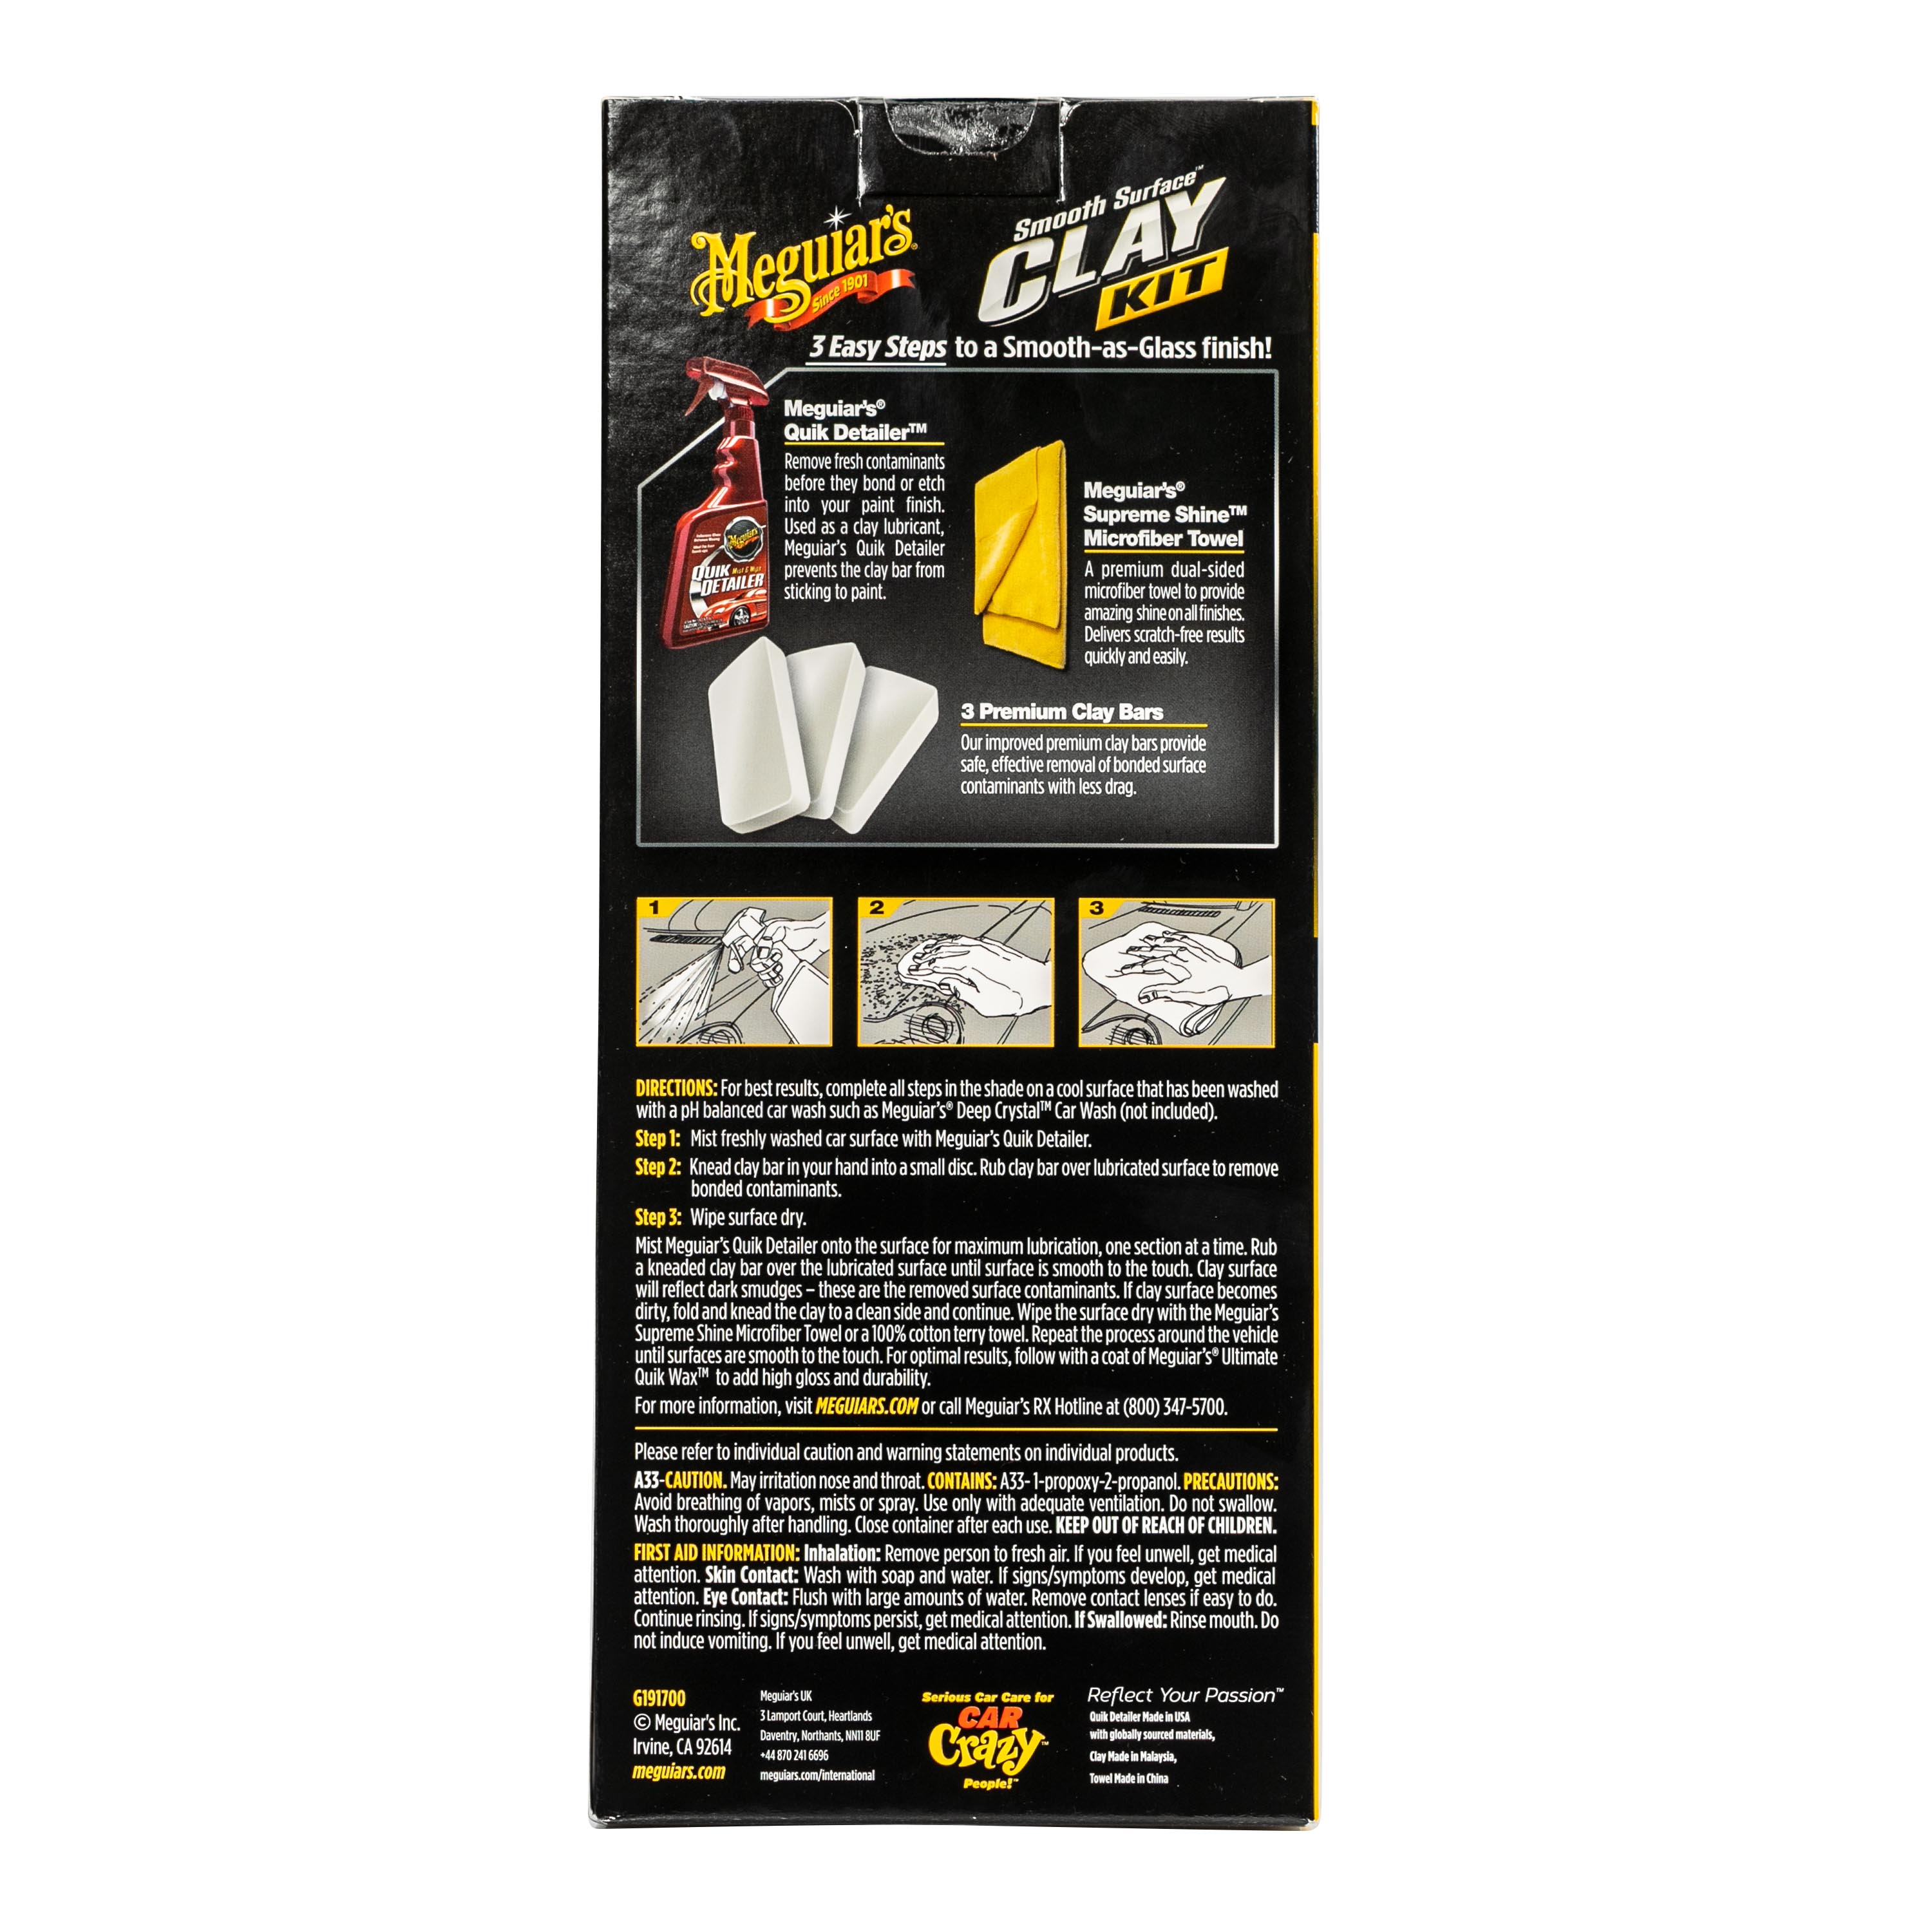 Meguiar's Clay Bar Kit with 2 Pack Clay Bars and Microfiber Towel